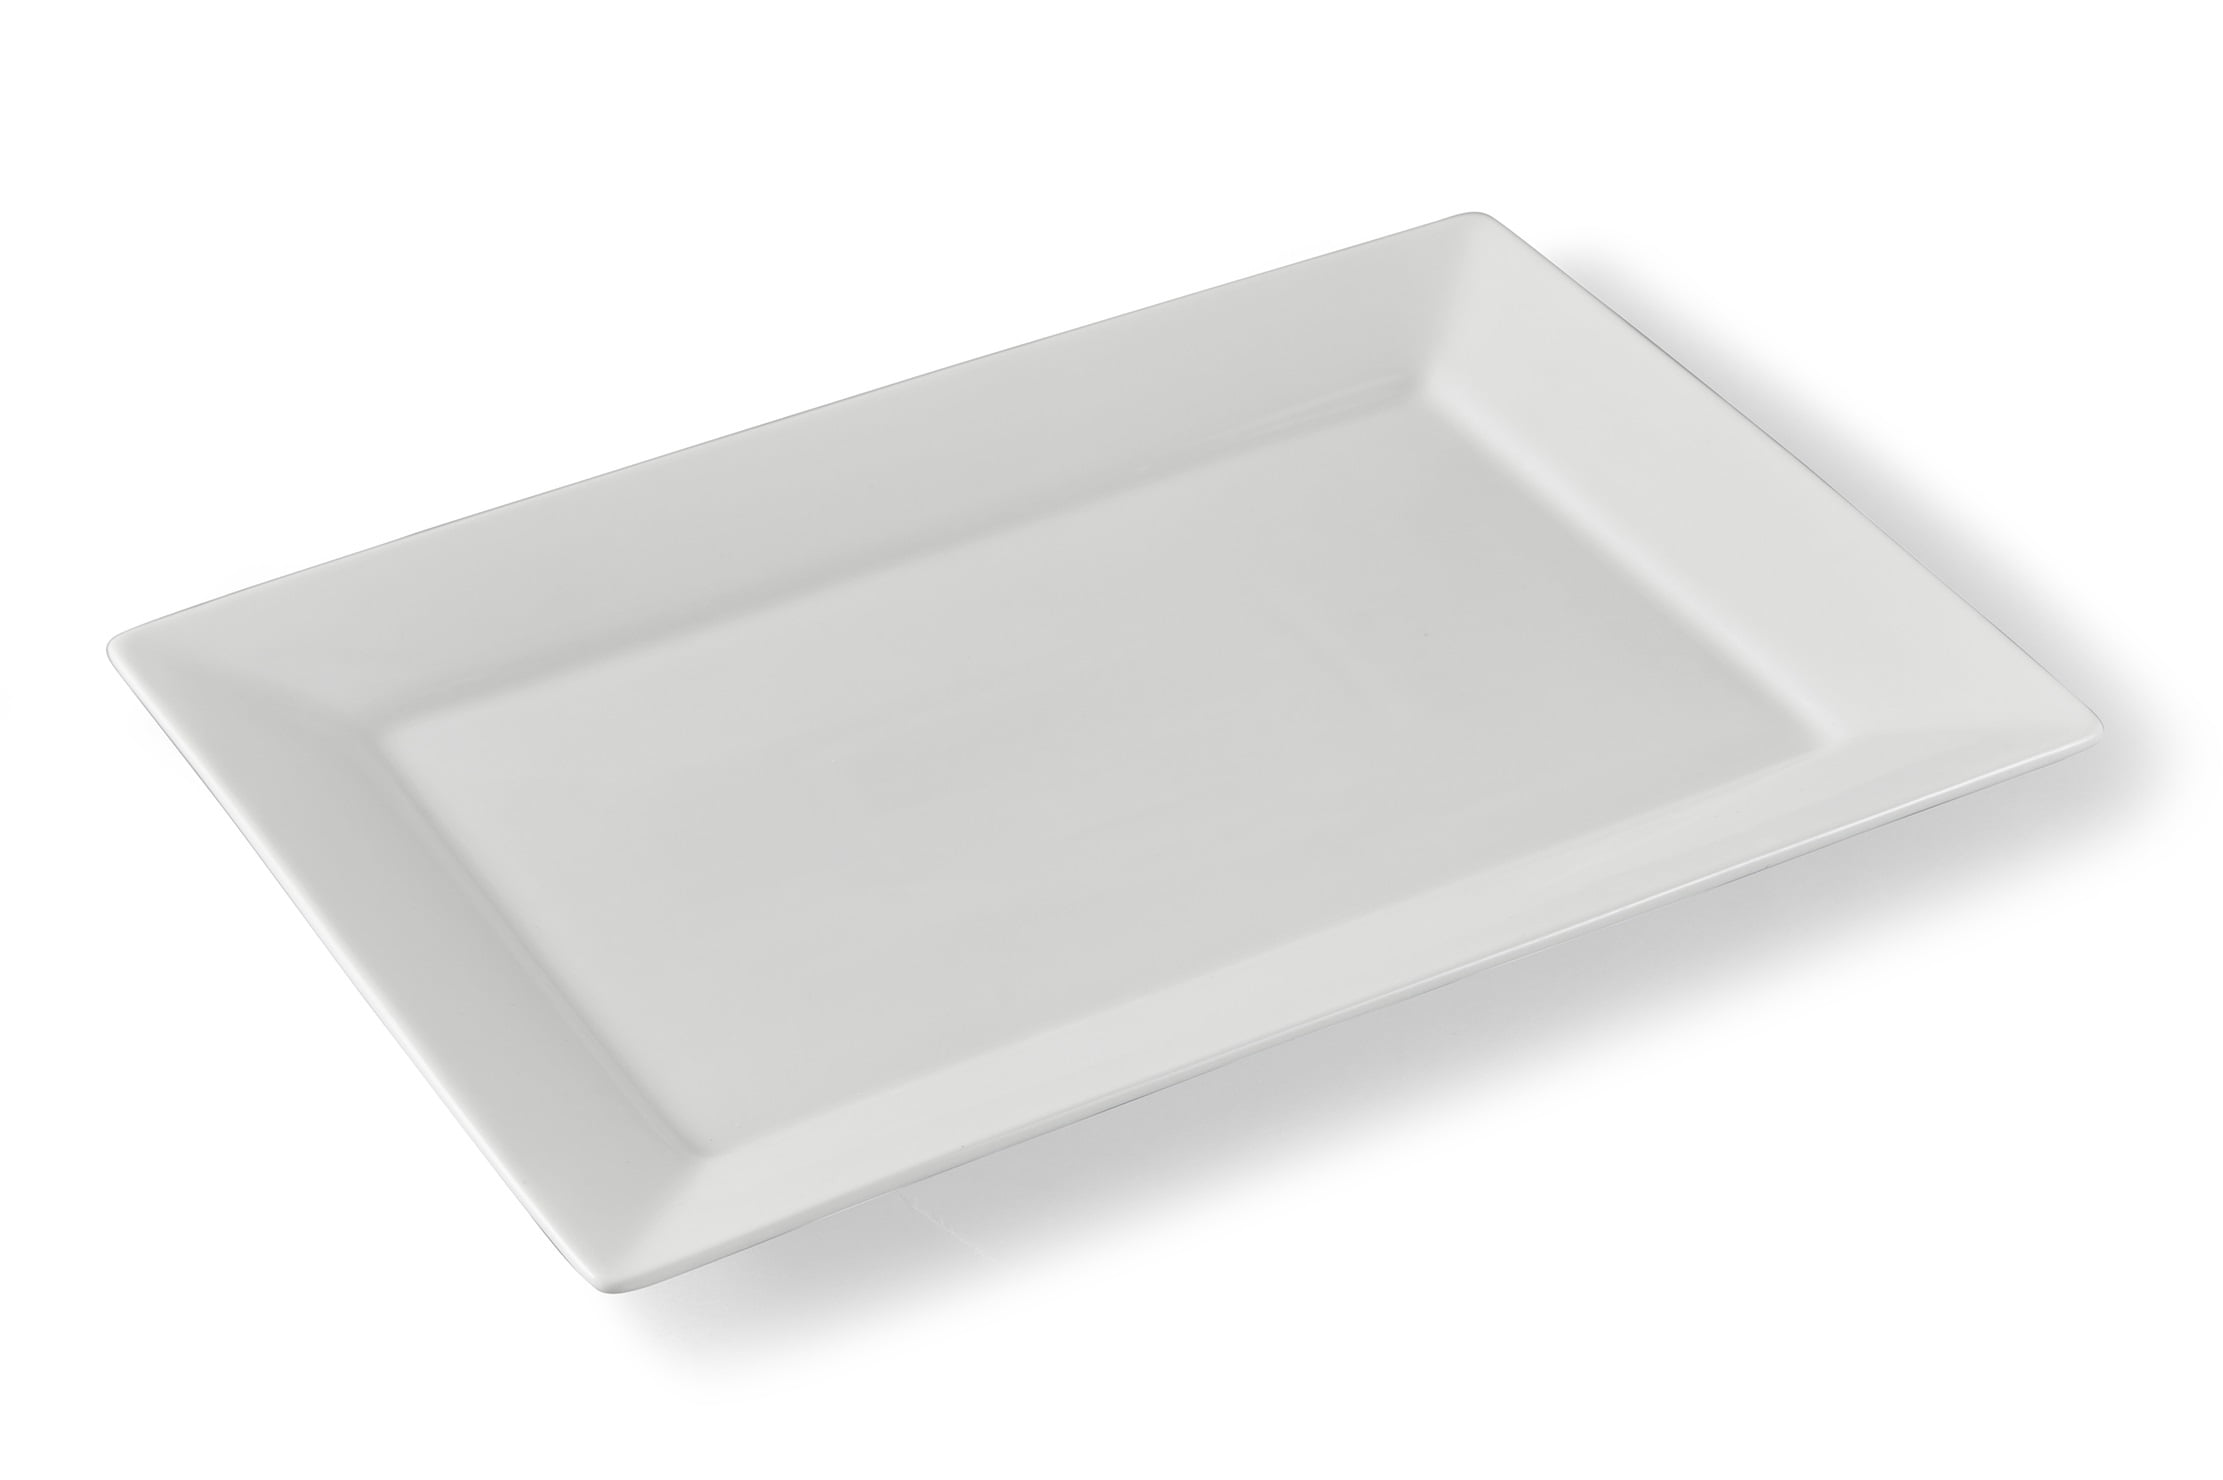 Pack of 2 microwave Great plates for snacks and Buffet Use dishwasher and freezer proof WIN-WARE Rectangular Serving Platter / Plates Dimensions : 8 x 5 200 x 130mm Oven Great value pure white porcelain Hotelware